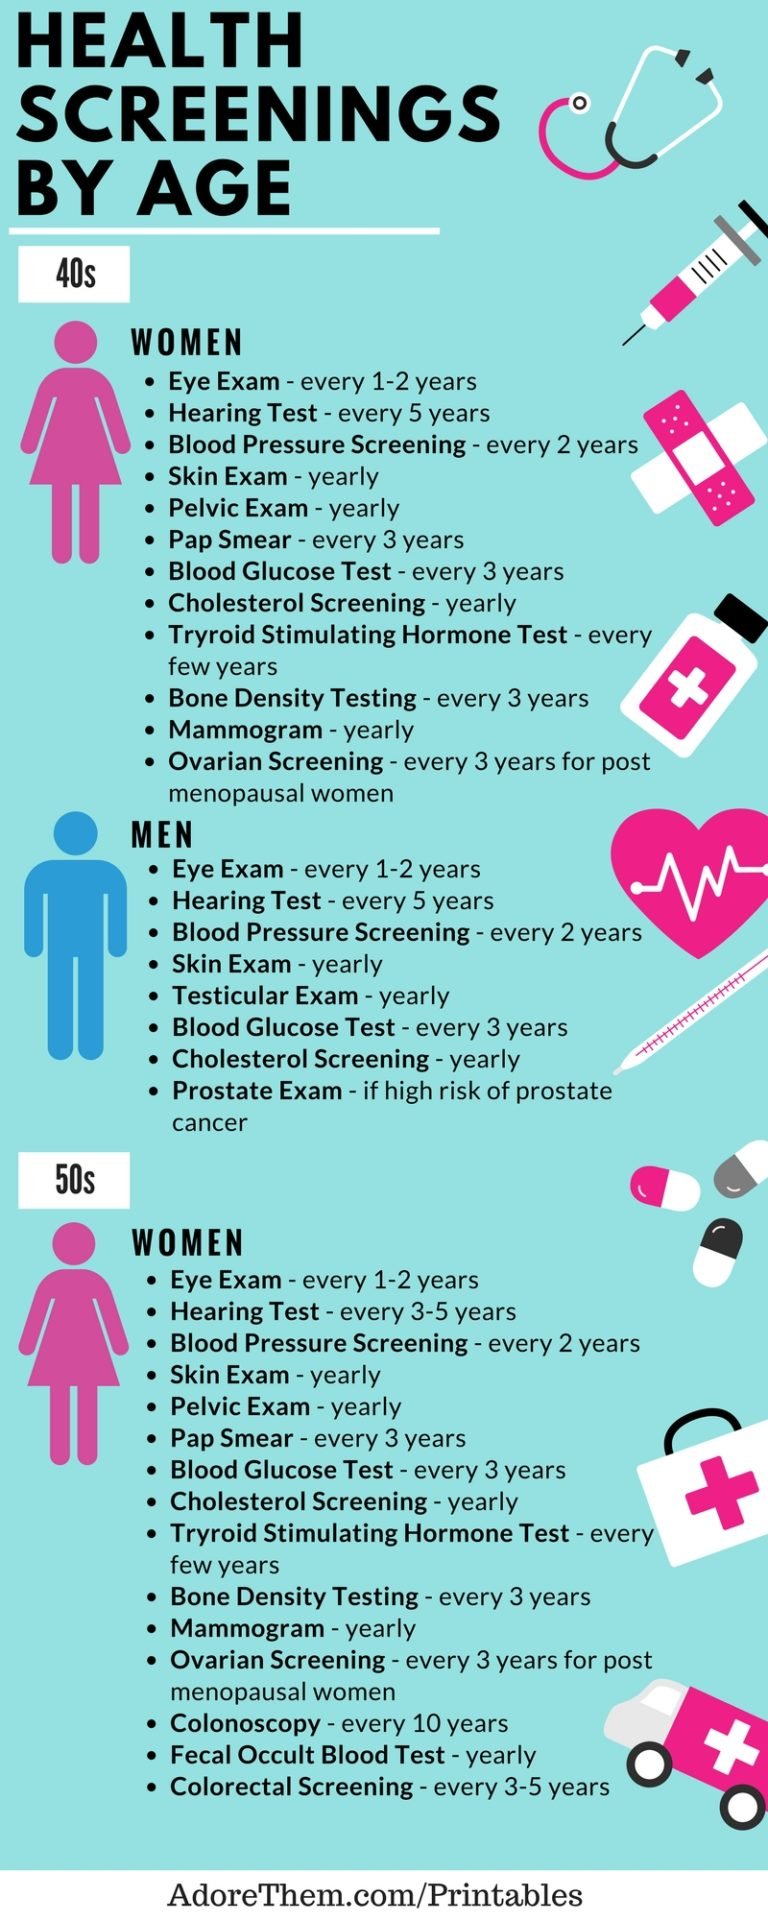 Health Screening By Age